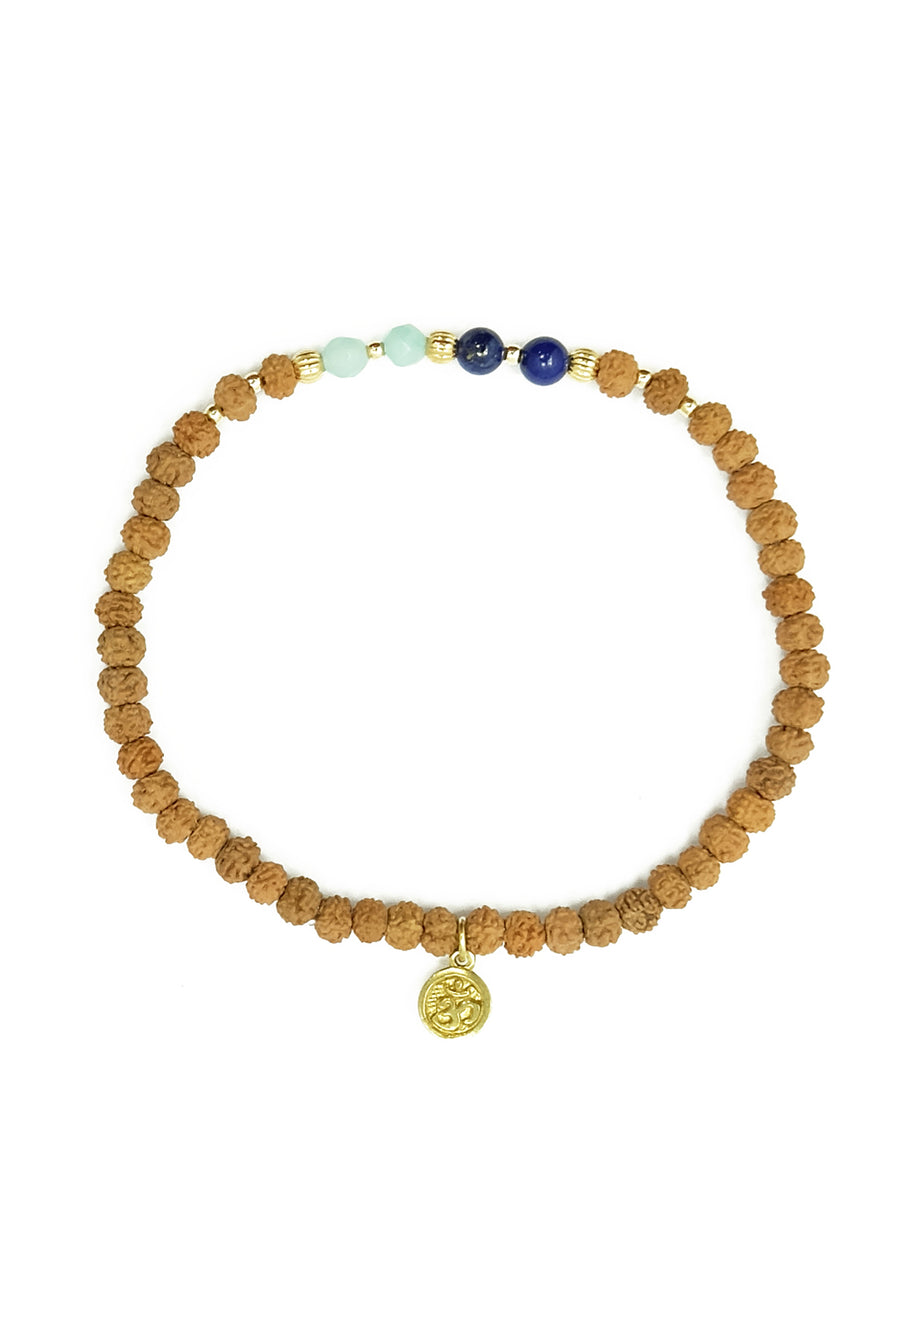 I am Calling IN A STRONG VOICE malas bracelet